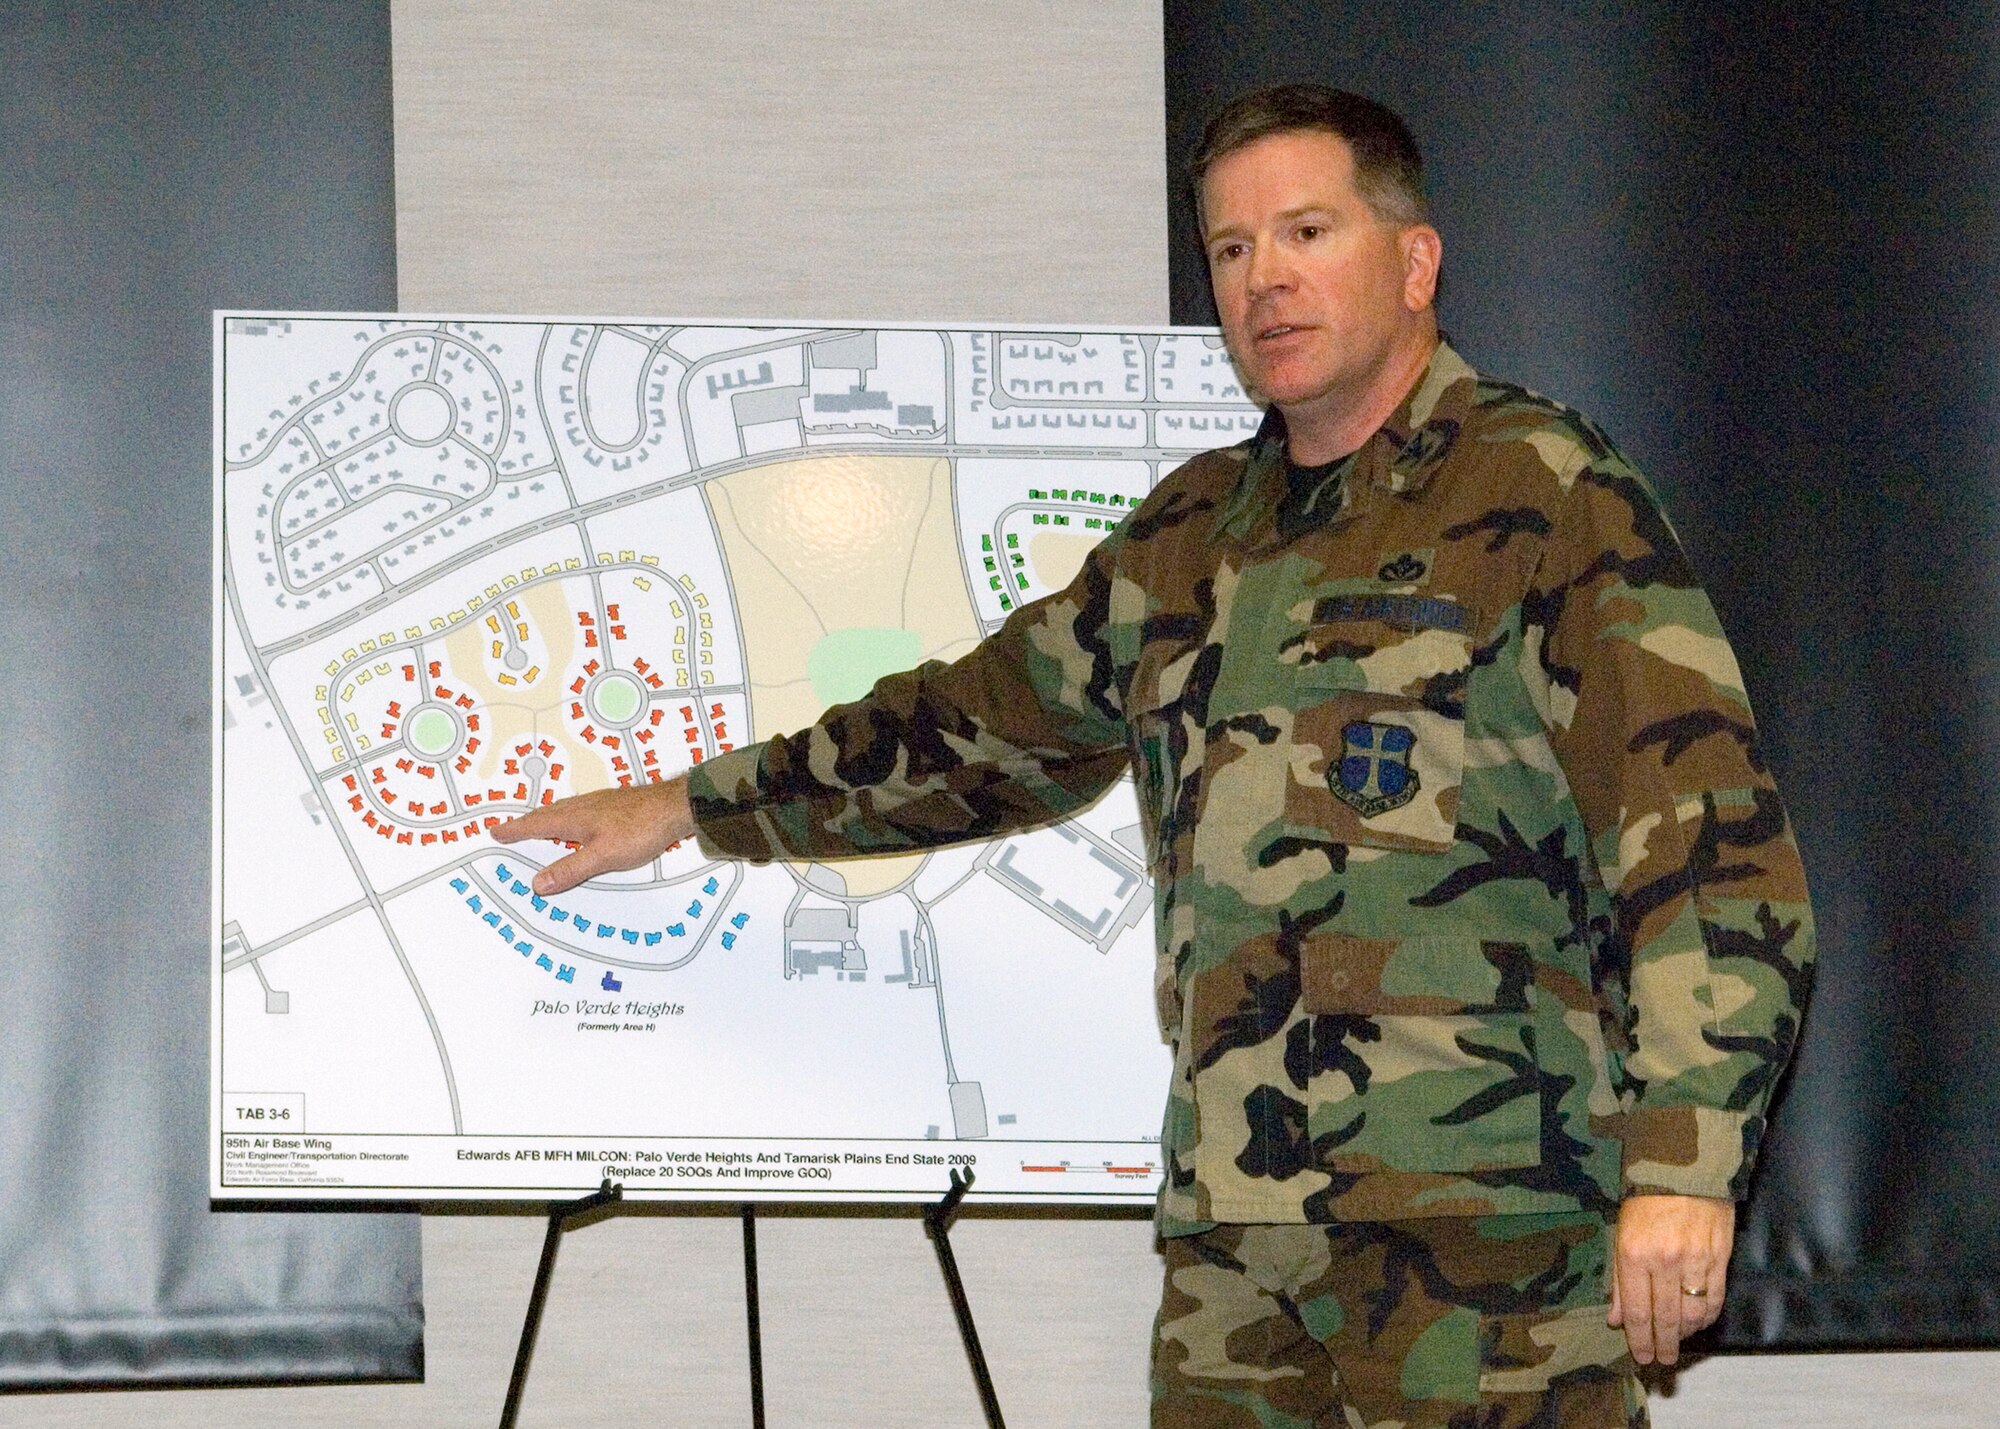 EDWARDS AIR FORCE BASE, Calif. -- Col. Bryan Gallagher, 95th Air Base Wing commander, explains the new housing move plan to Team Edwards at a town hall meeting in the Conference Center on June 15. The residential moves are part of the completion of the housing construction program. (Photo by Jim Shryne)